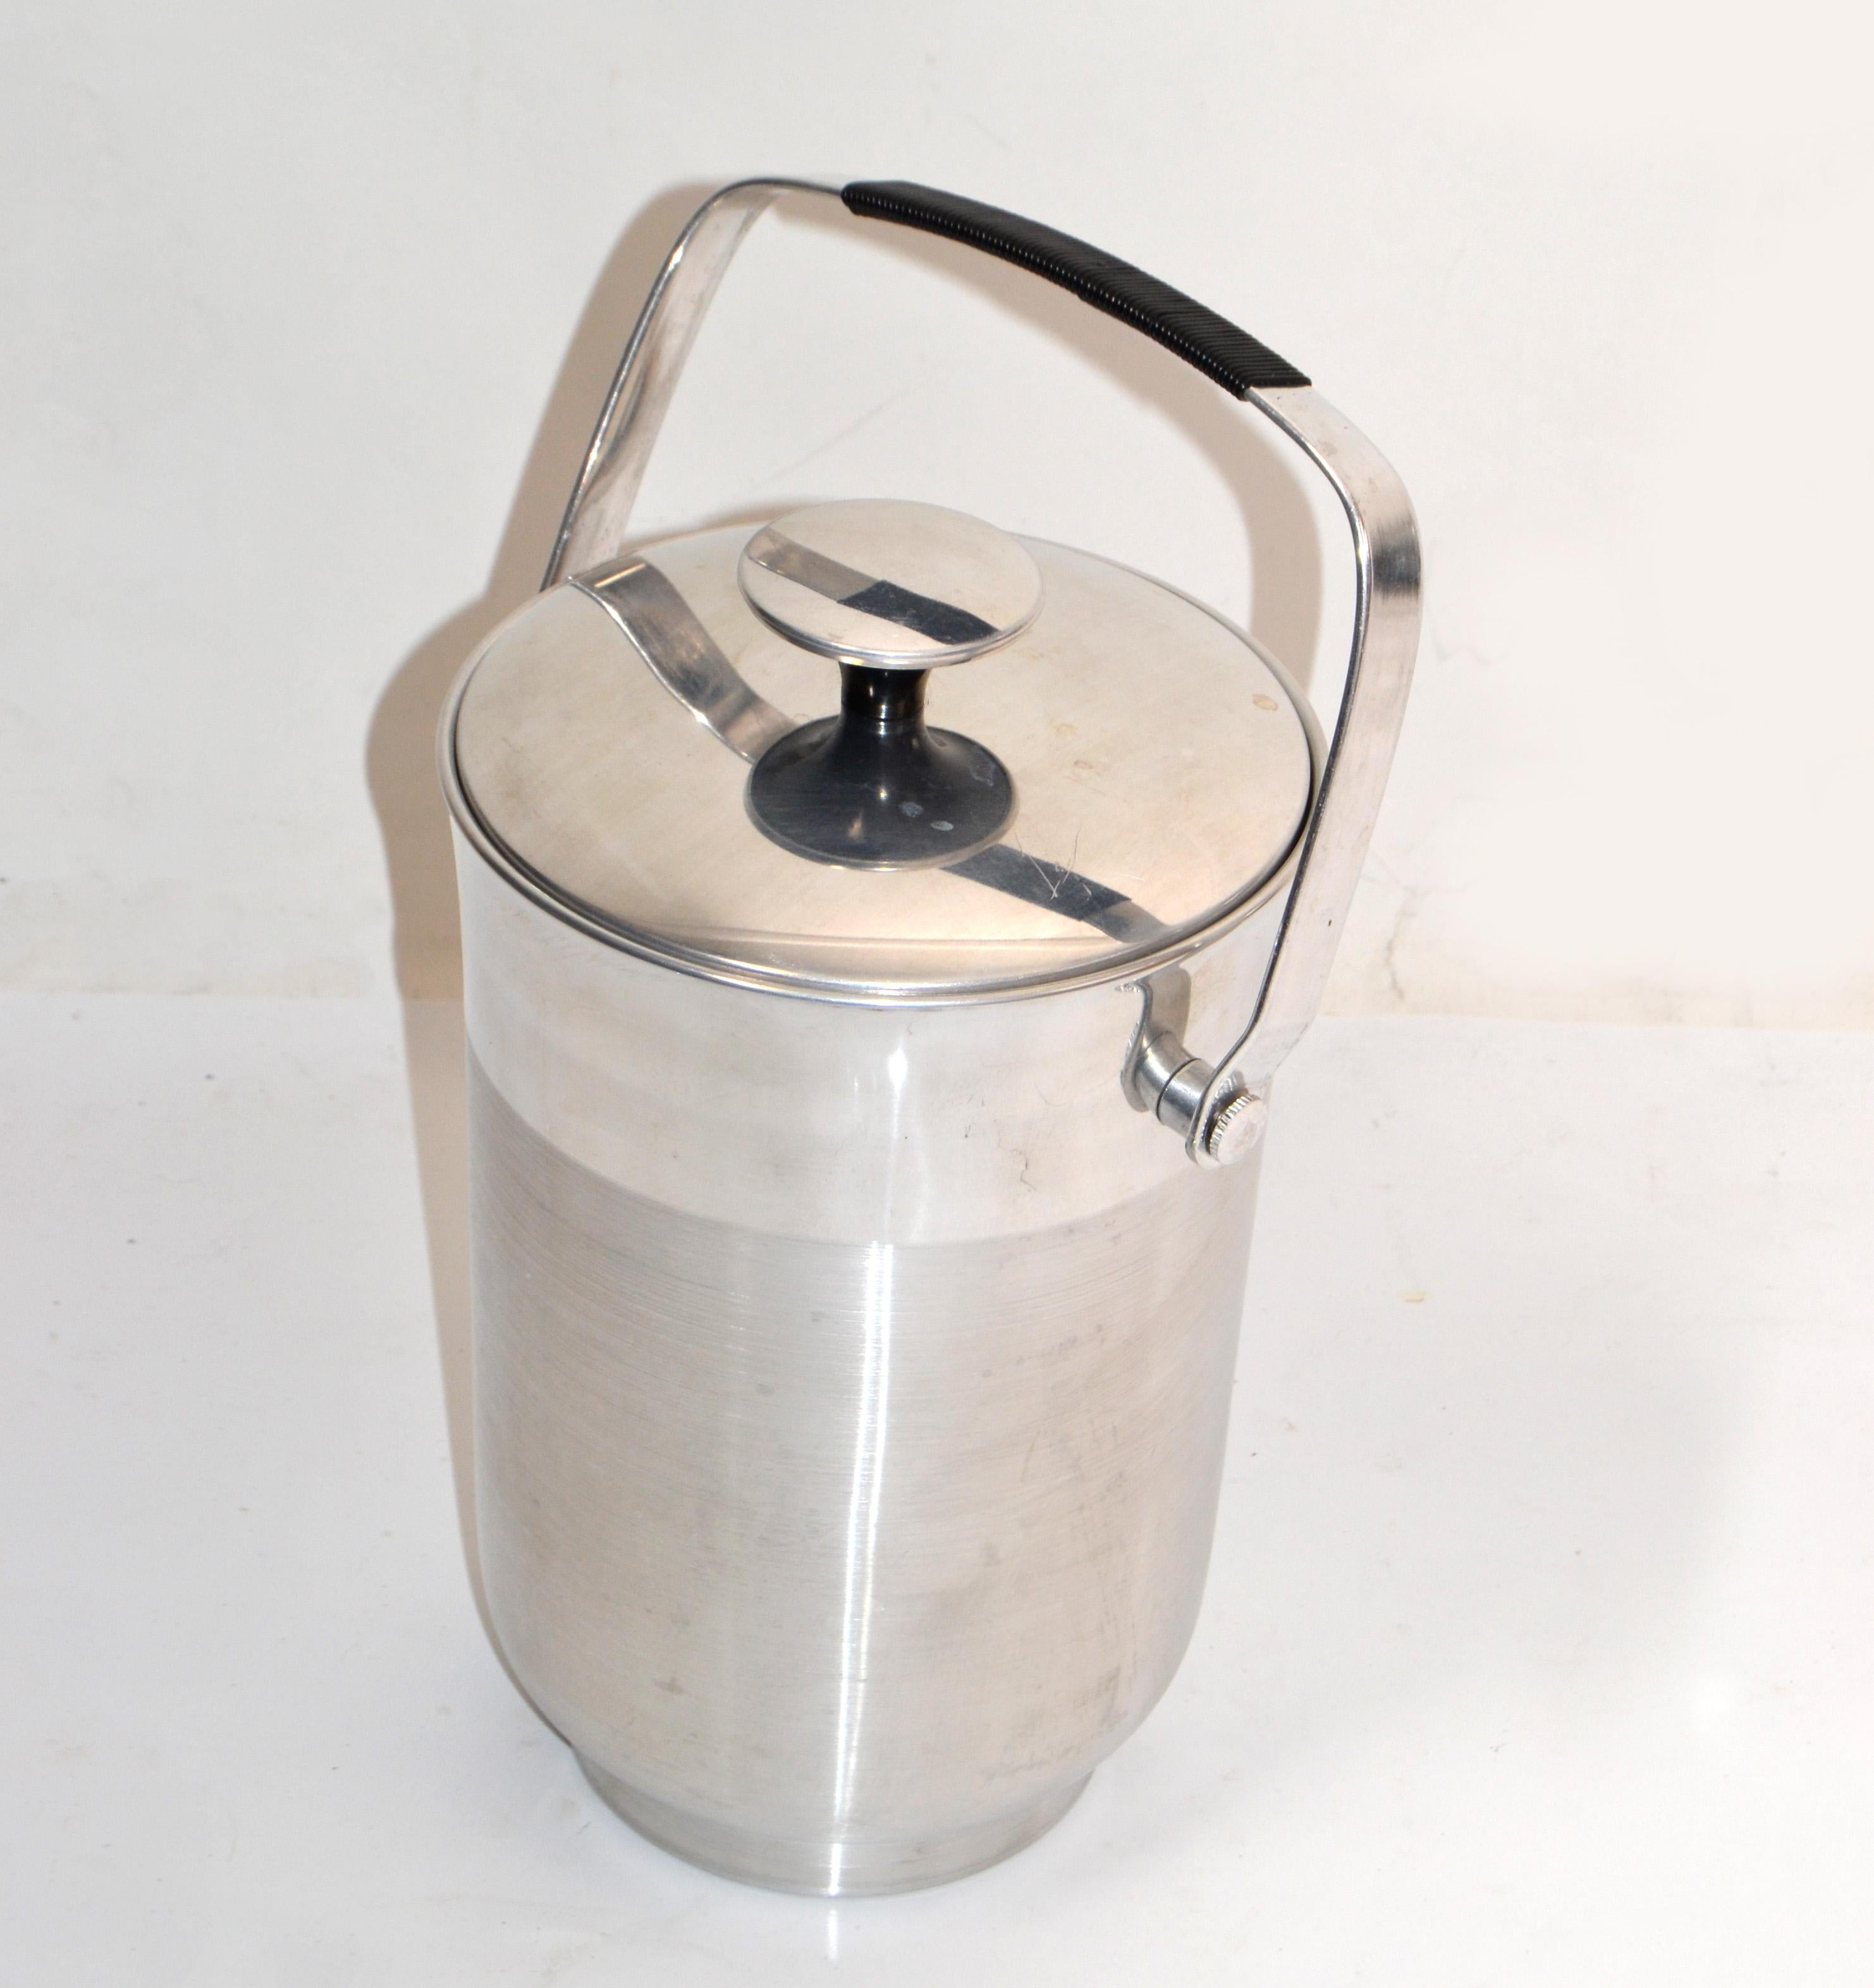 Italian Polished Steel Mid-Century Modern Wine Cooler with Lid & Handle, objets D'arts, ice bucket, vessel.
Marked at the base and numbered:
B-509 Made in Italy.